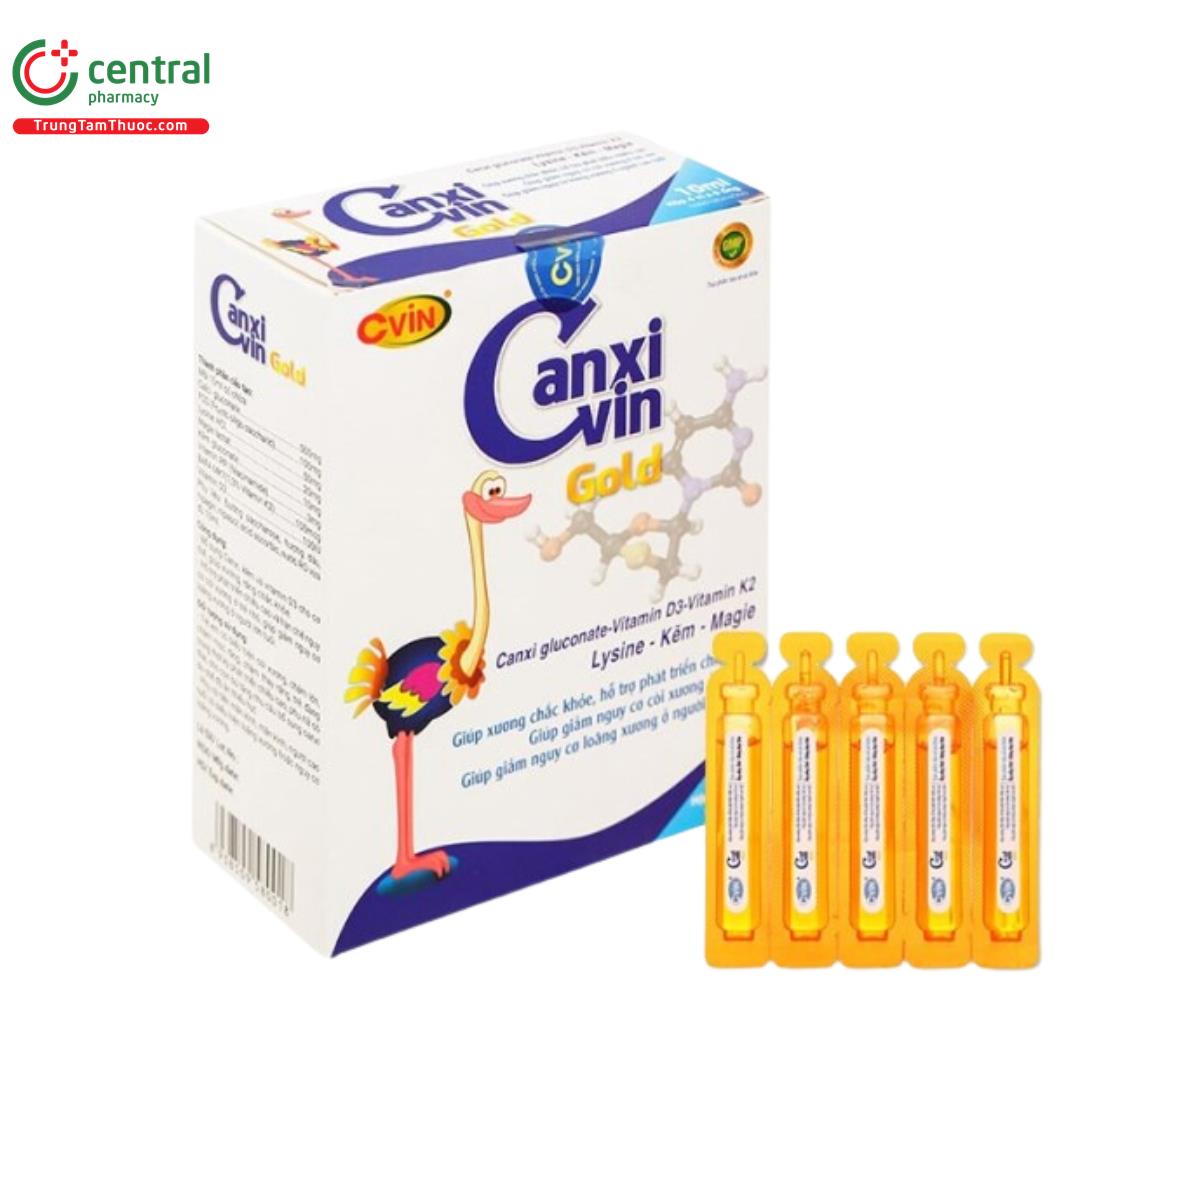 canxi vin gold 2 E2725